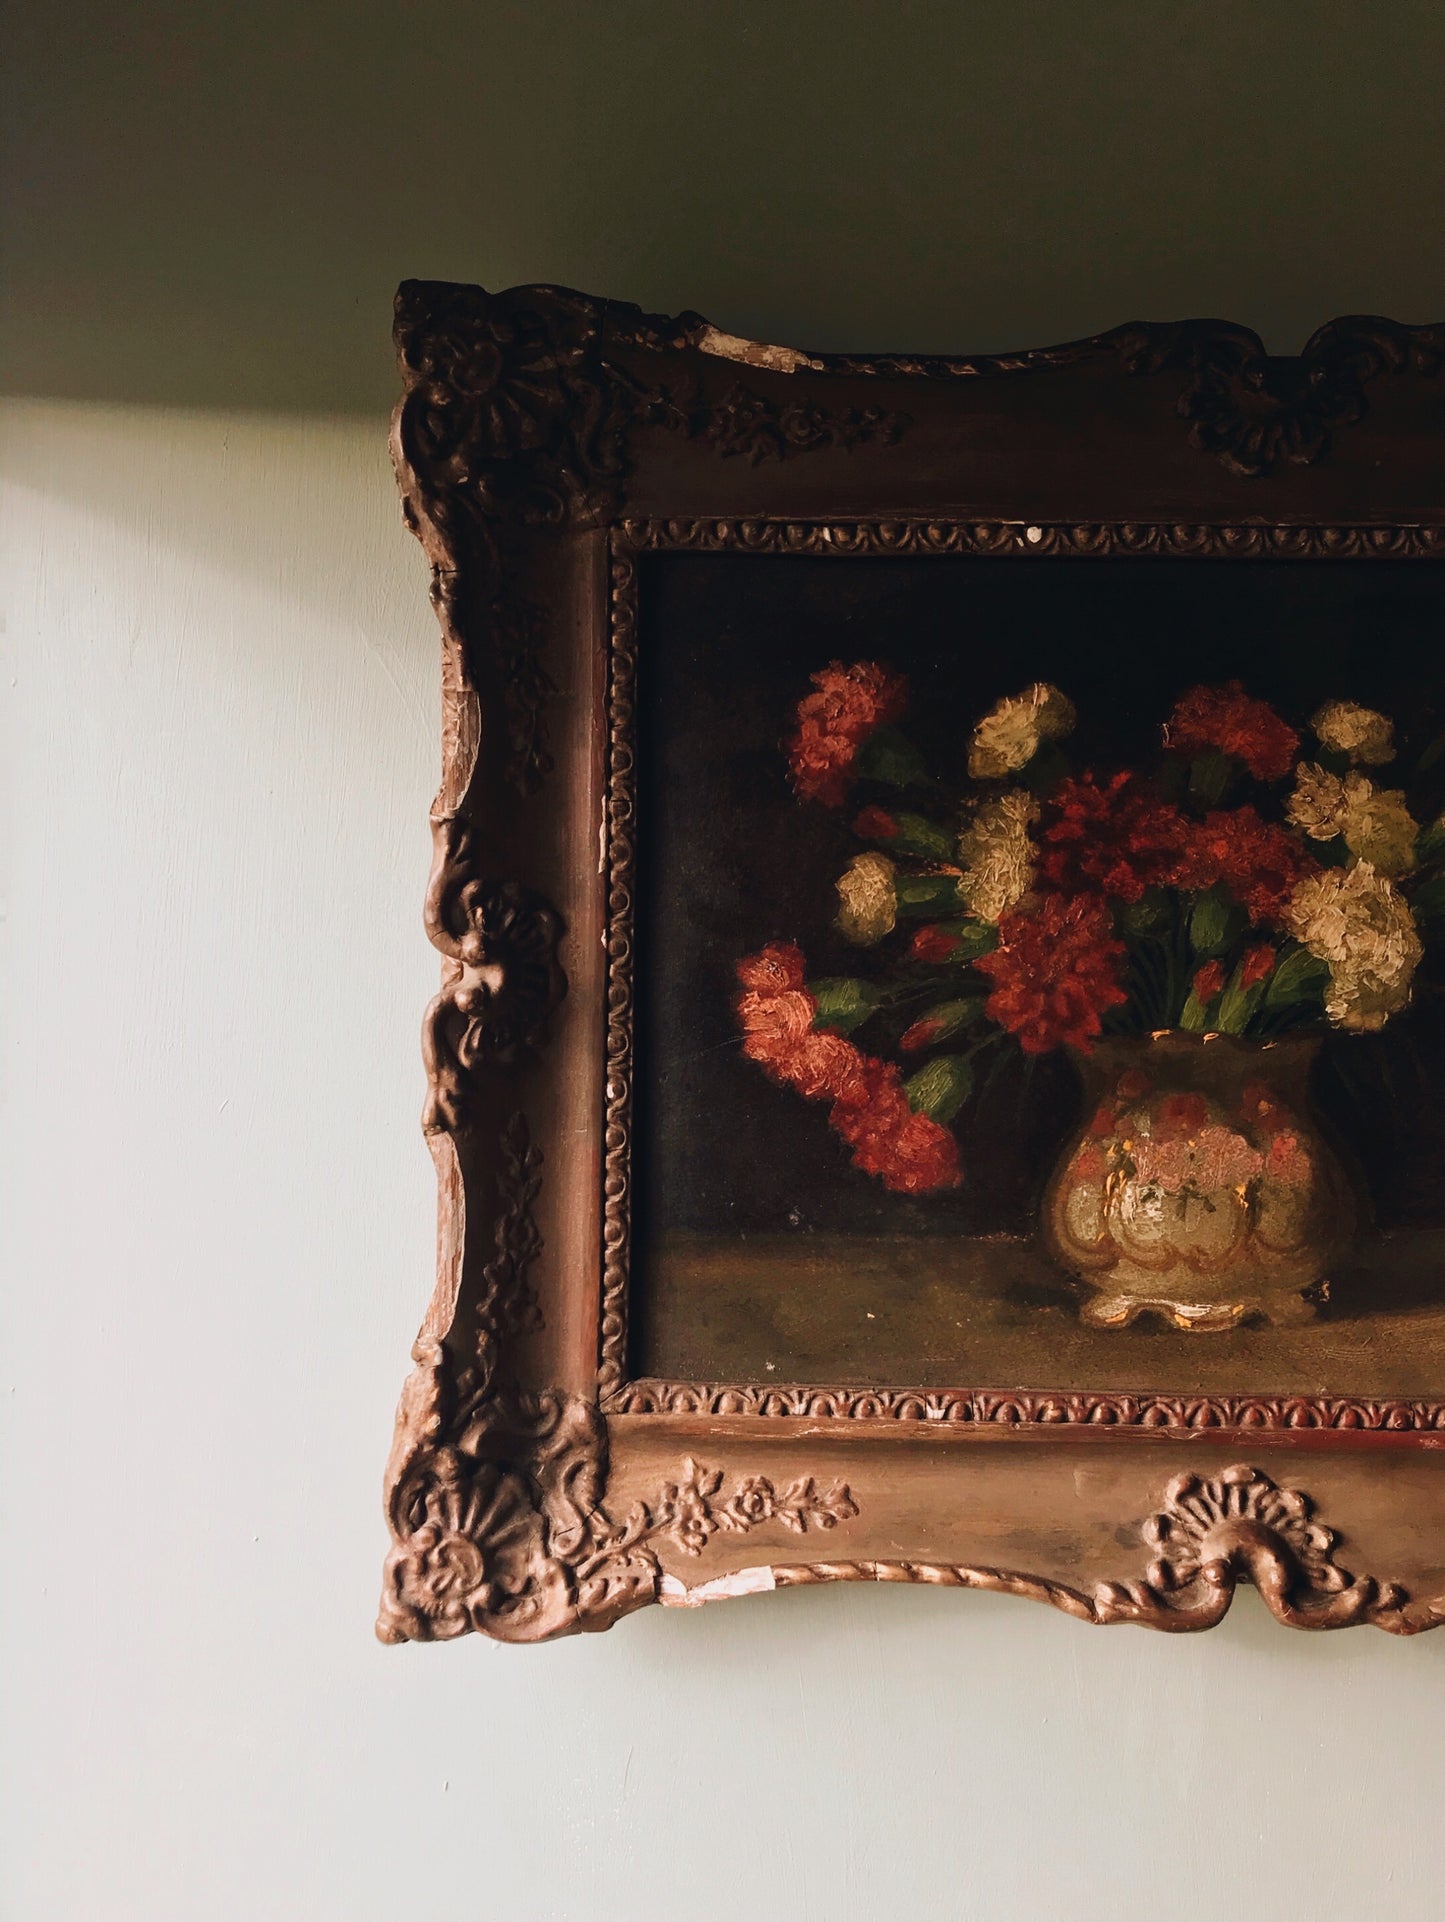 Antique Oil Painting late 18th C  ~ Flowers in Italian Rococo Decorative Vase (UK purchase & courier only) - Stone & Sage 